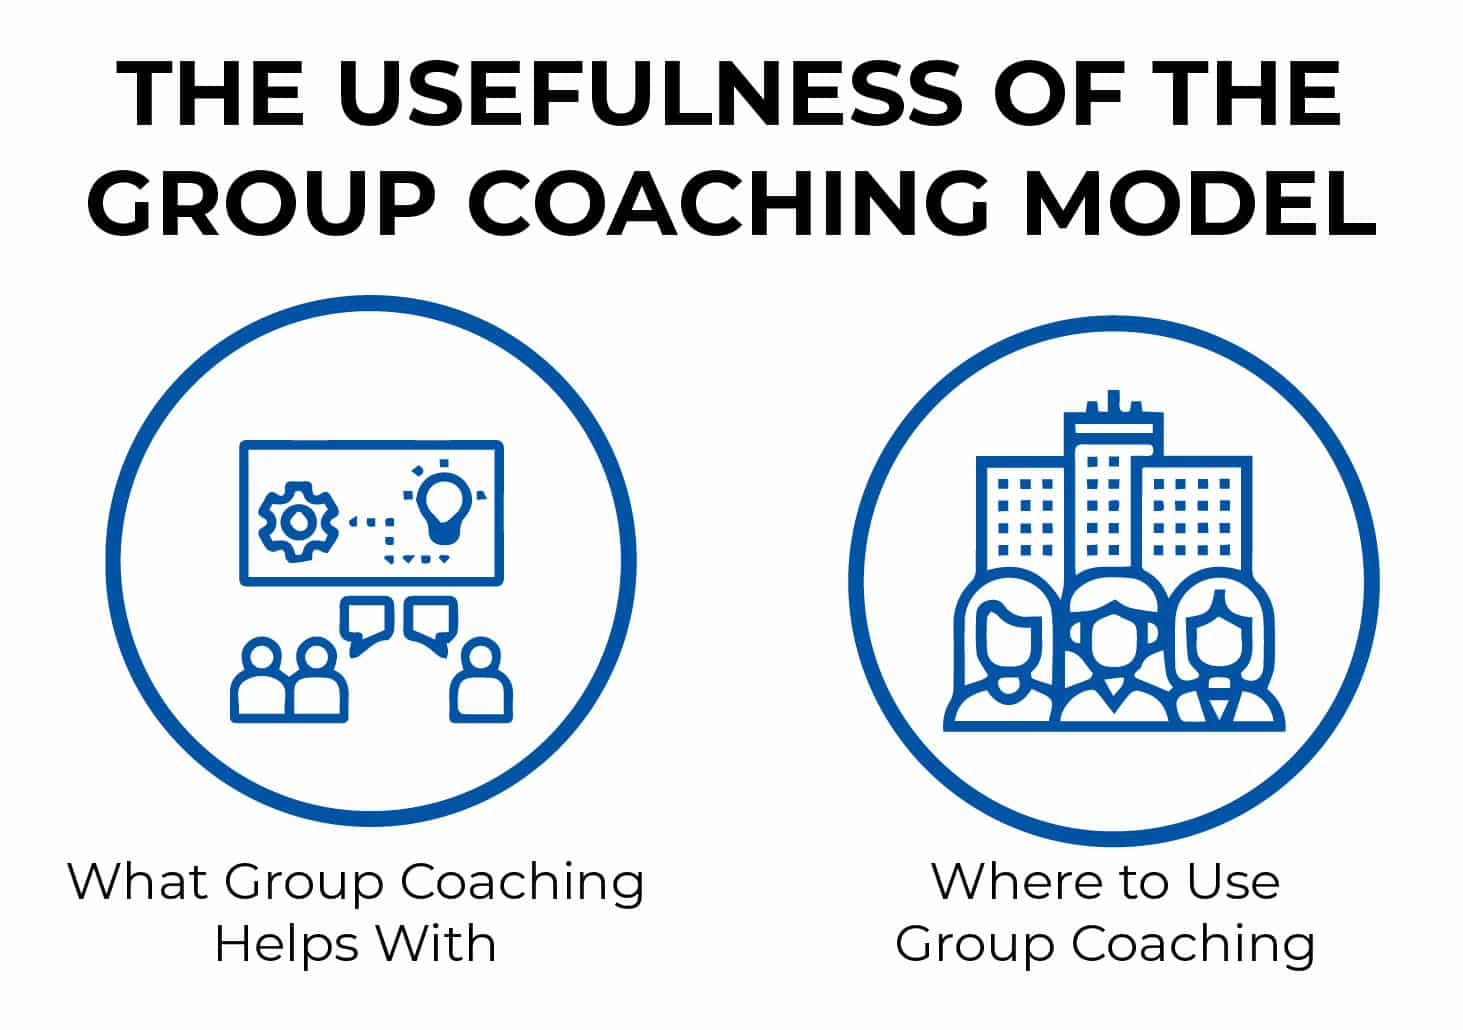 THE USEFULNESS OF THE GROUP COACHING MODEL